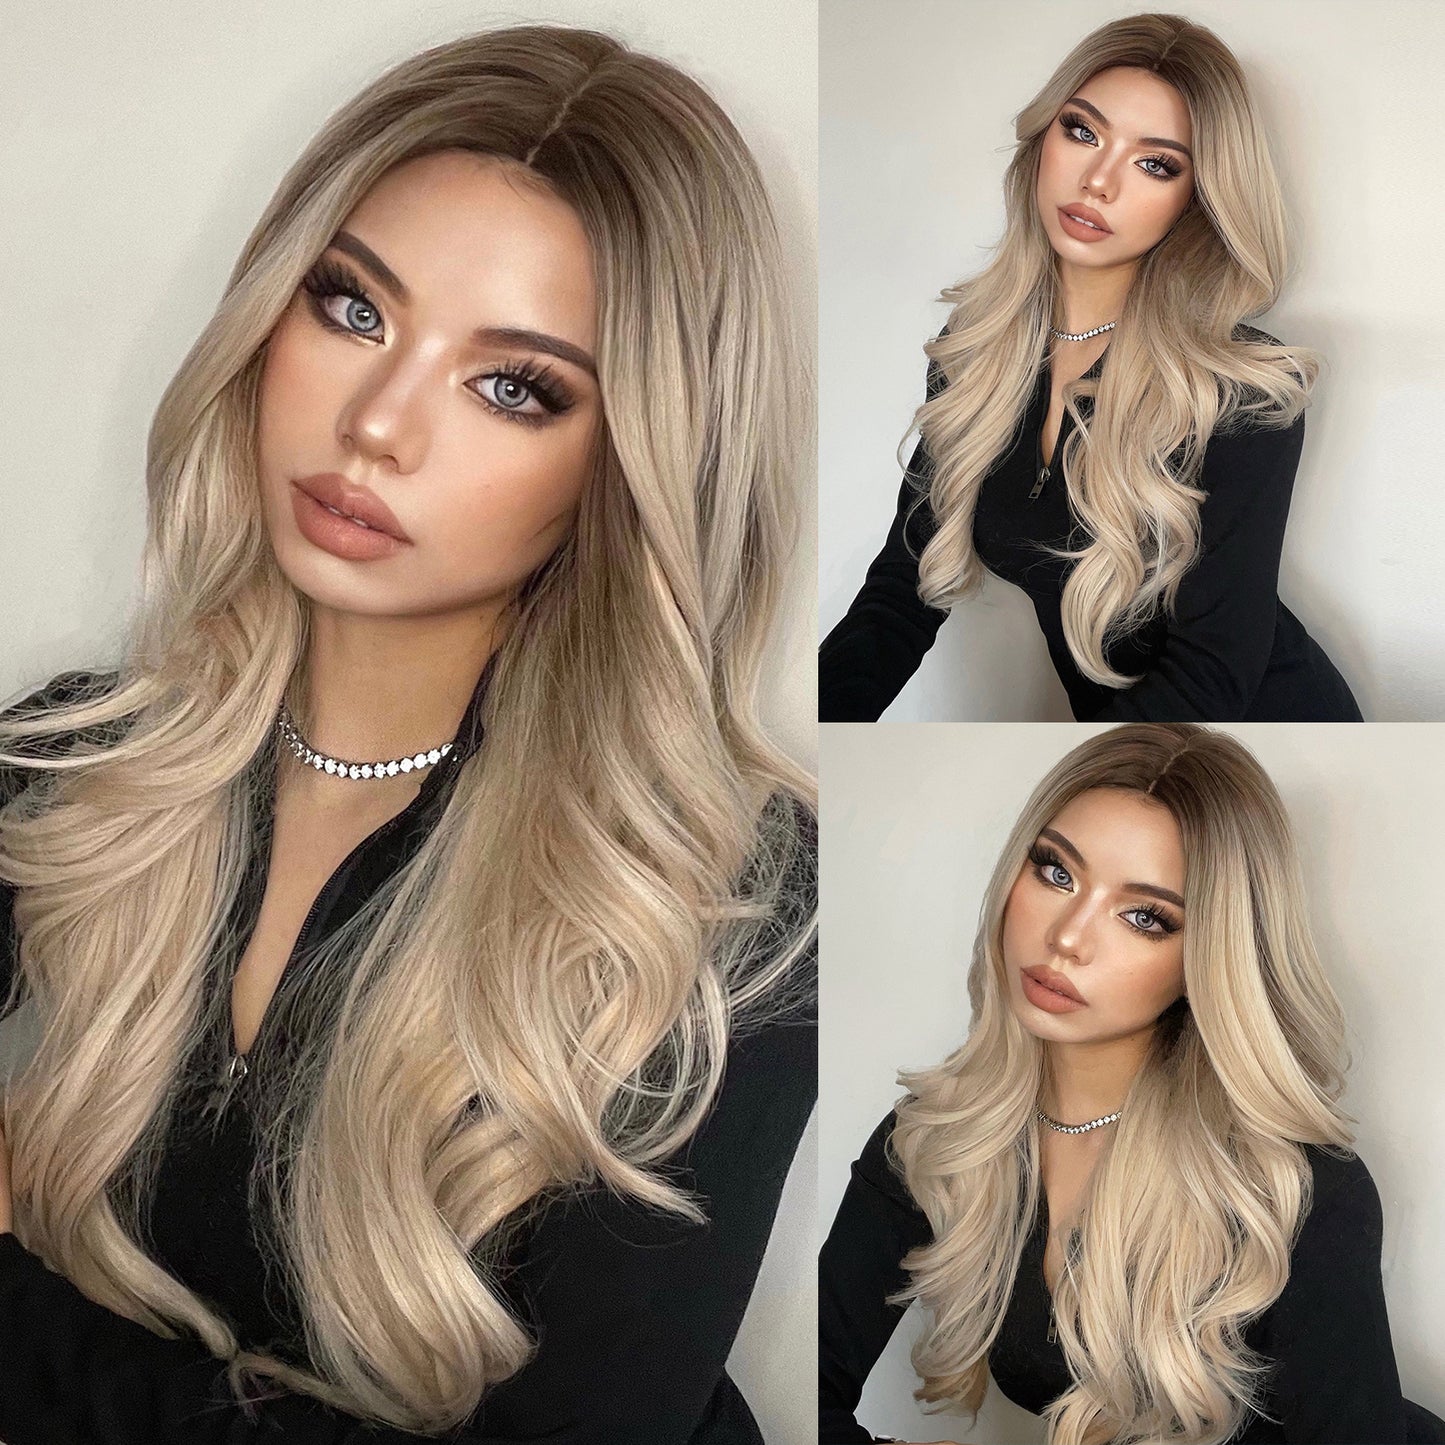 【Serenity】Loxology | Long curly wigs black ombre blonde with middle bangs wigs